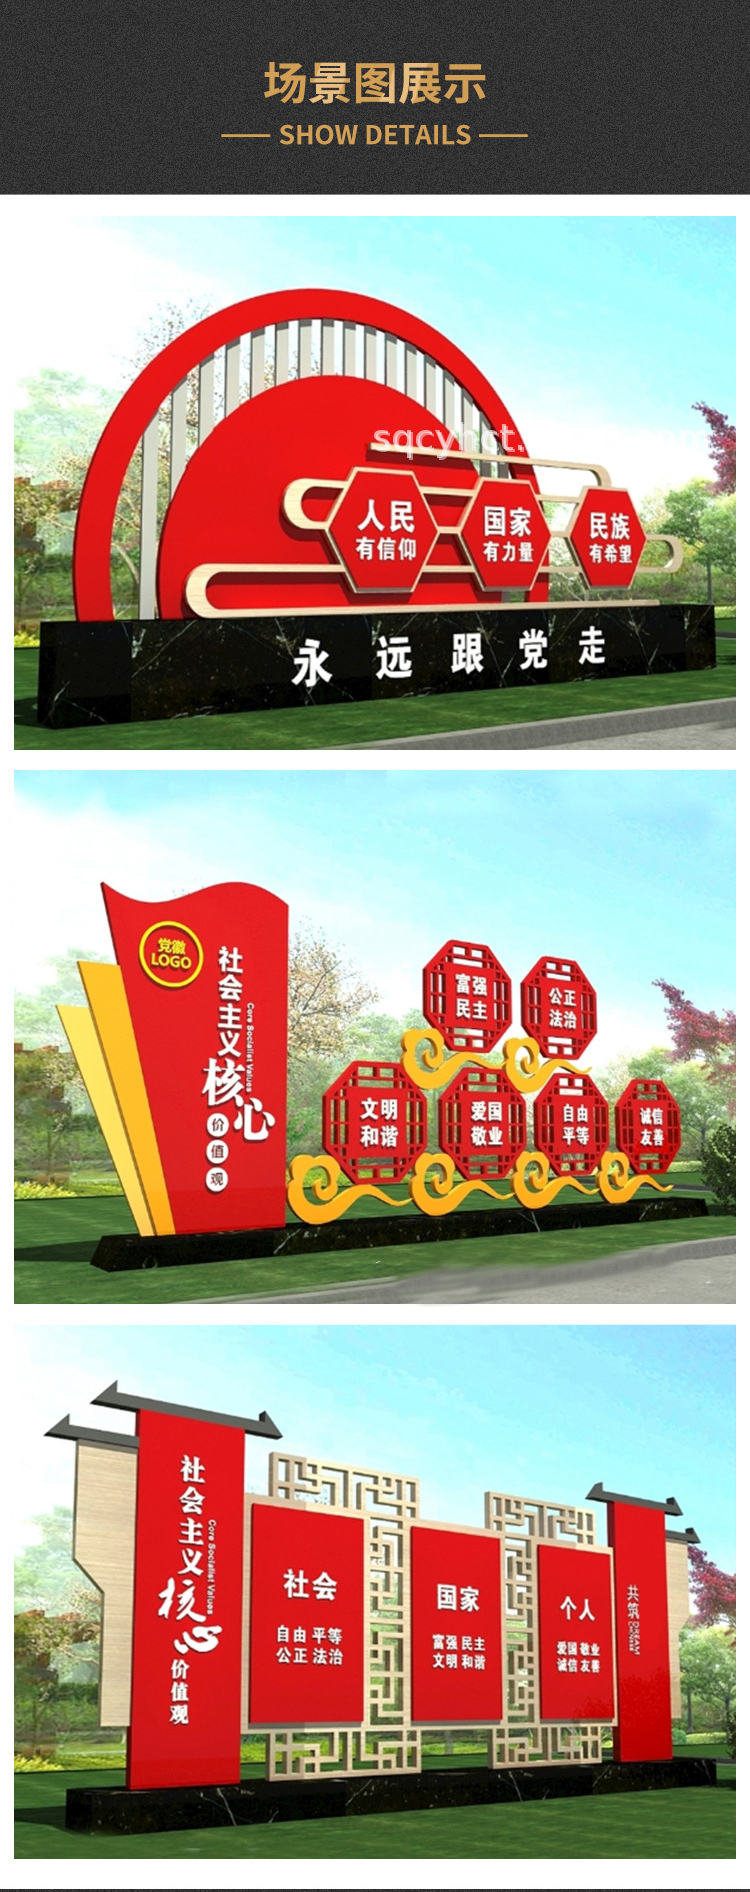 Outdoor signage billboard processing, customized stainless steel landscape advertising billboard, school announcement bulletin board